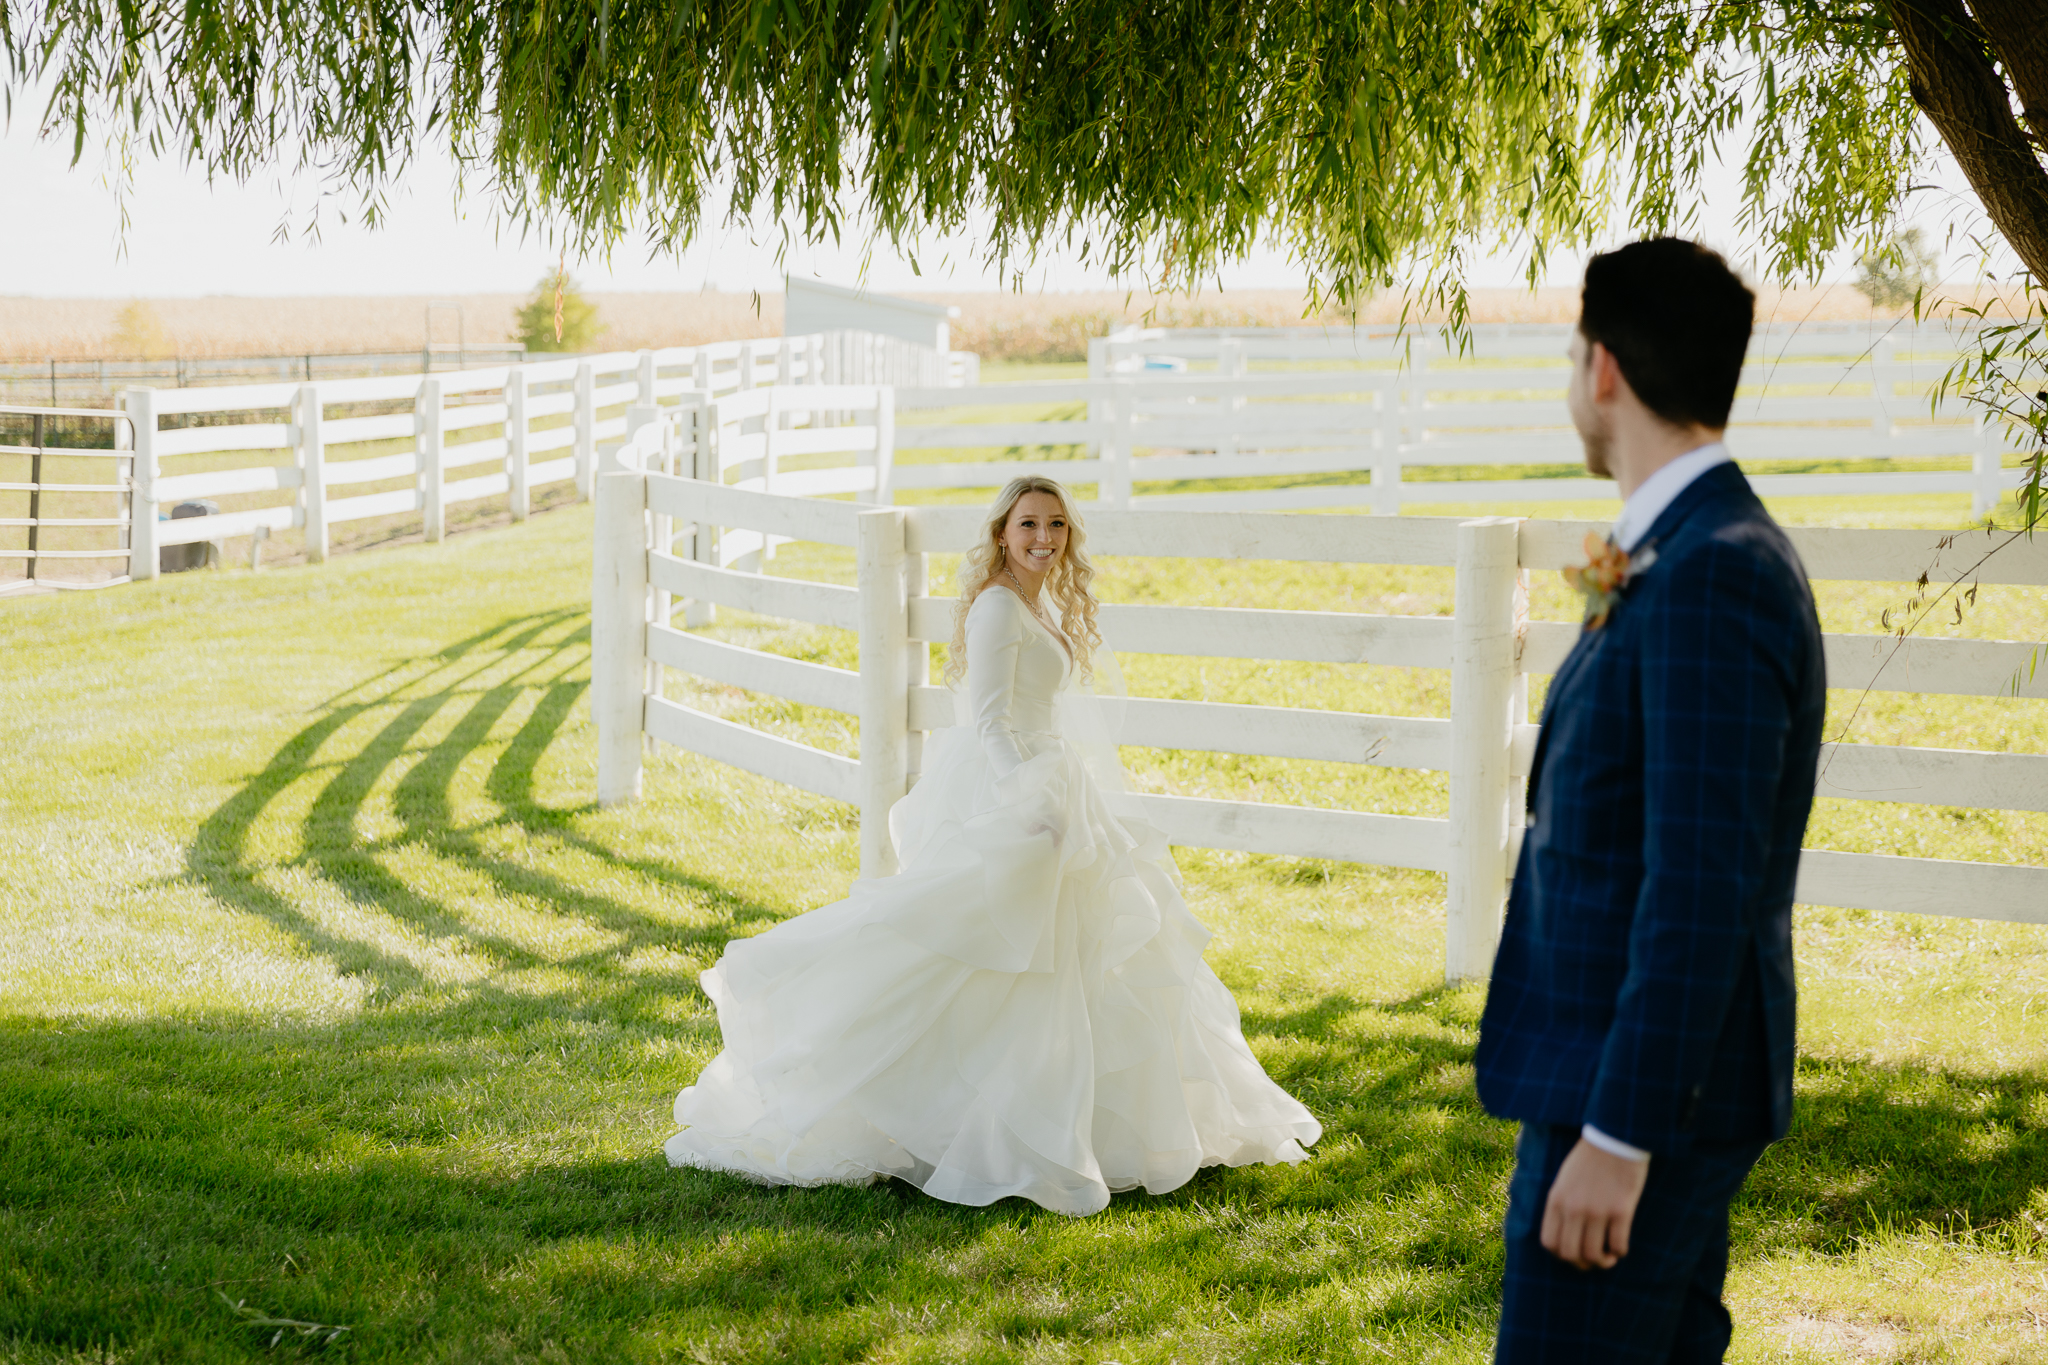 groom watches as his bride spins around underneath a willow tree, with horse pastures in the background